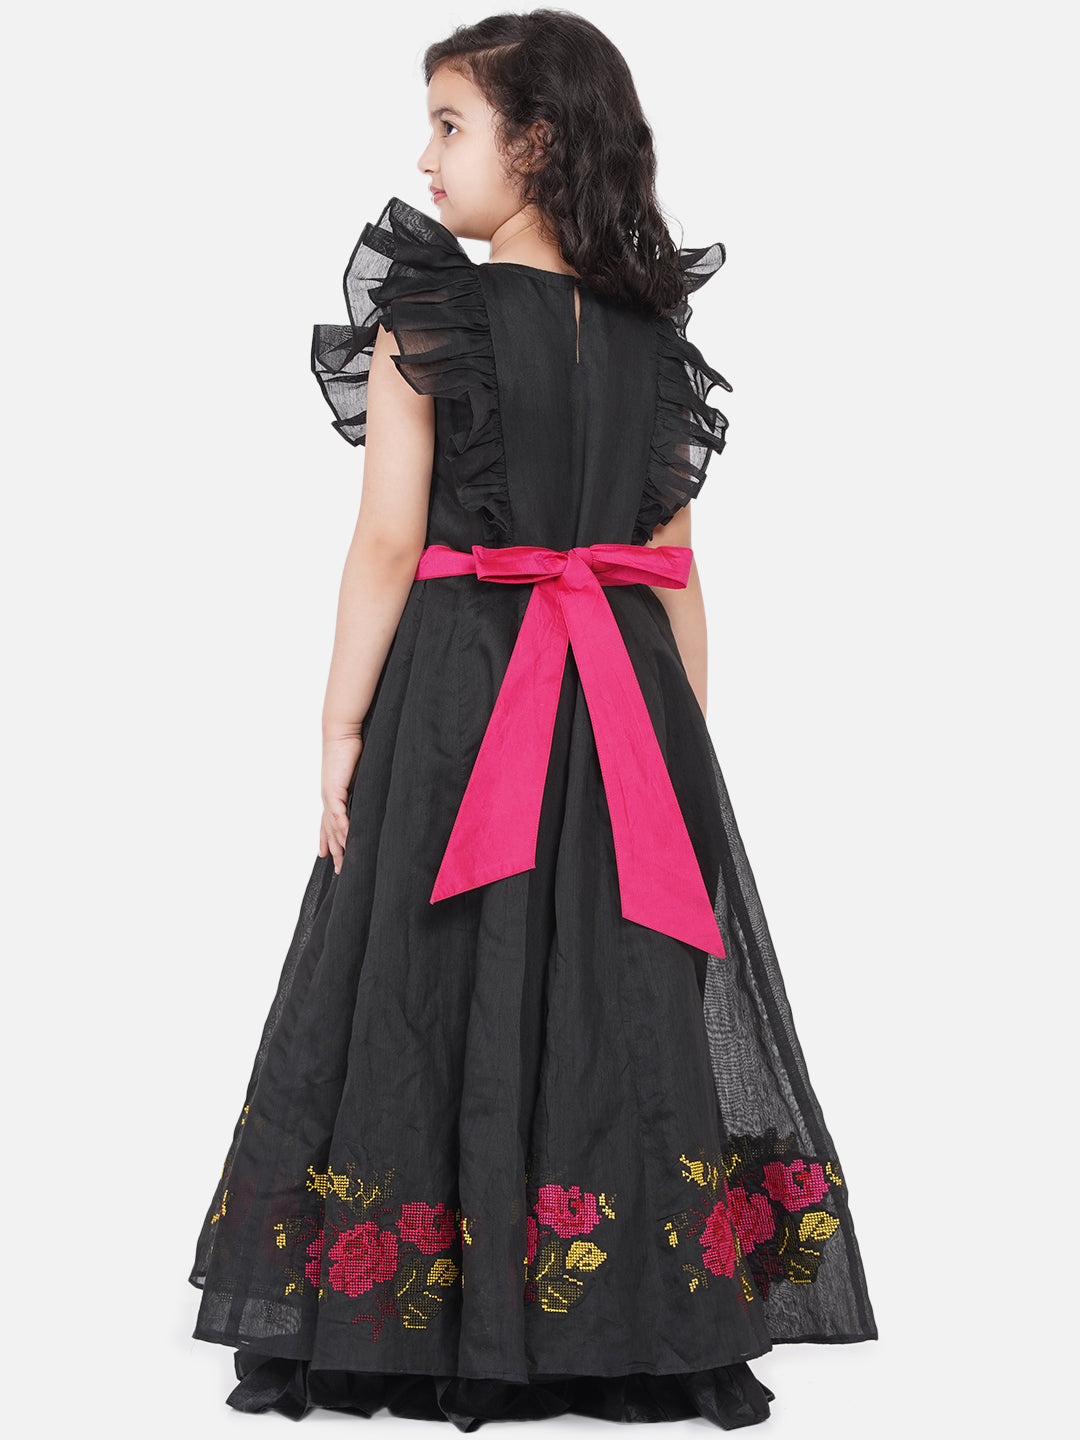 Black embroidery evening gown | Fashion dress party, Long gown dress,  Indian fashion dresses